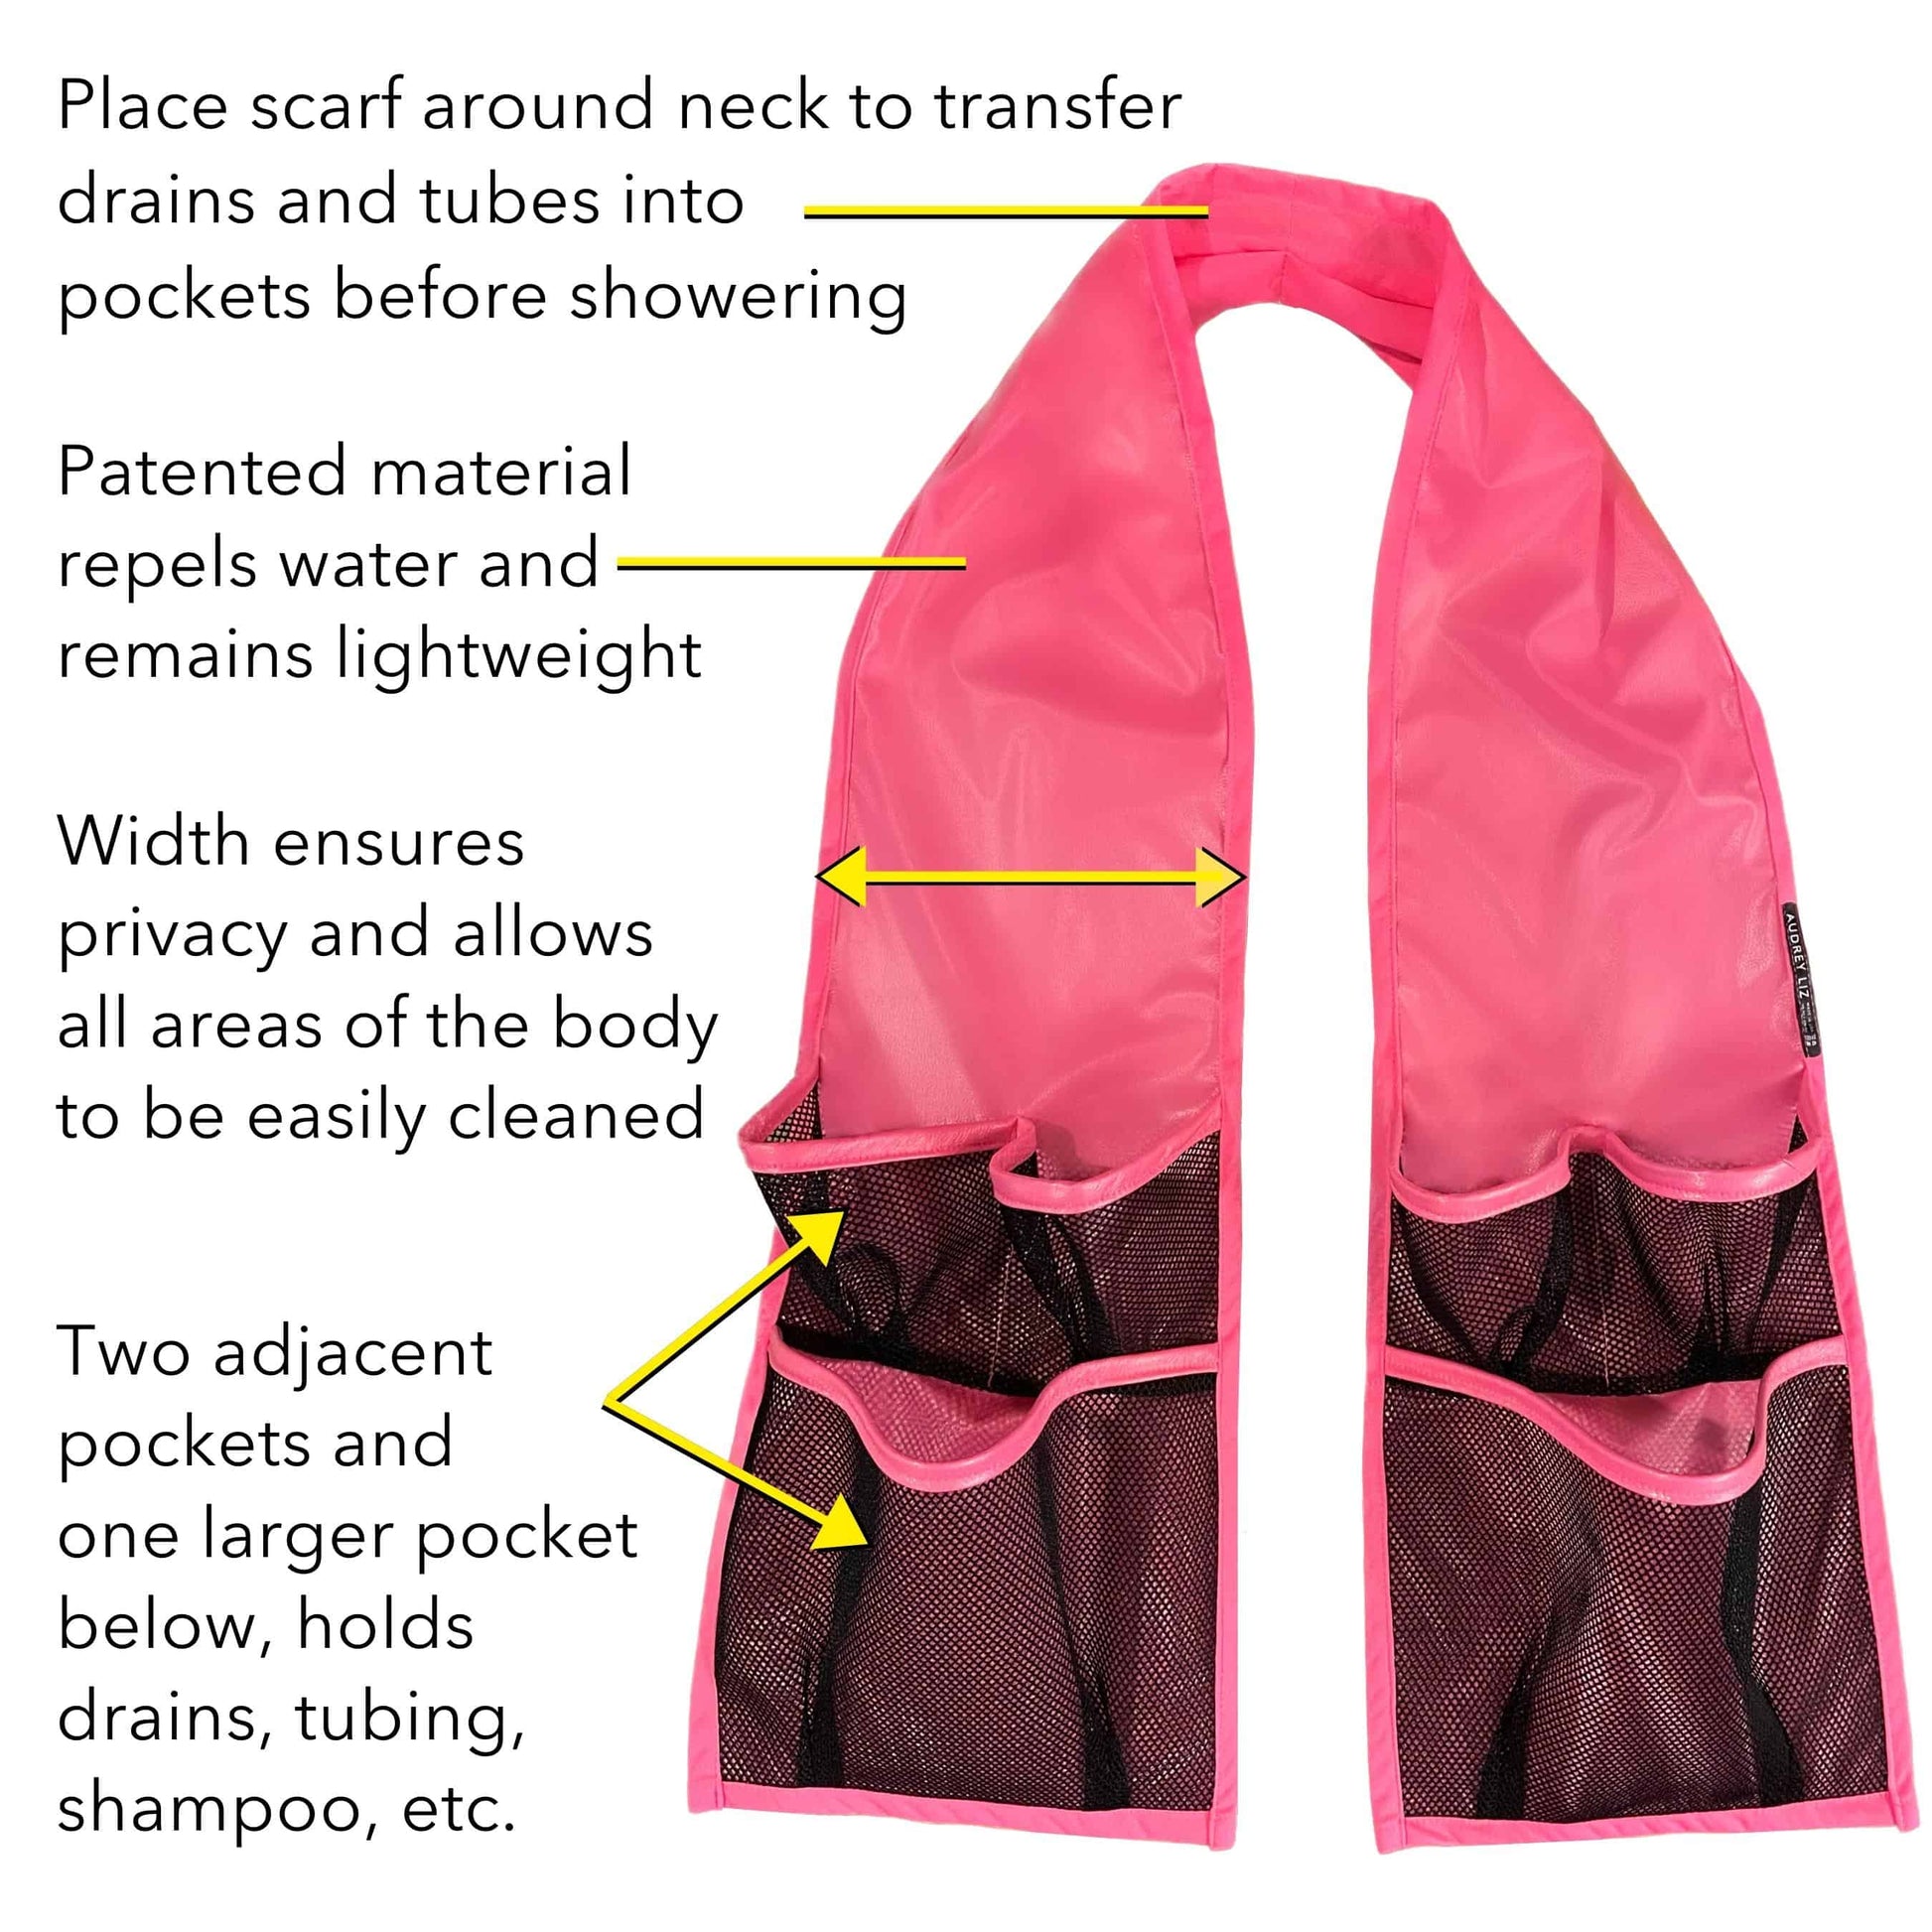 Diagram labeling features of the breast cancer bathing aid.